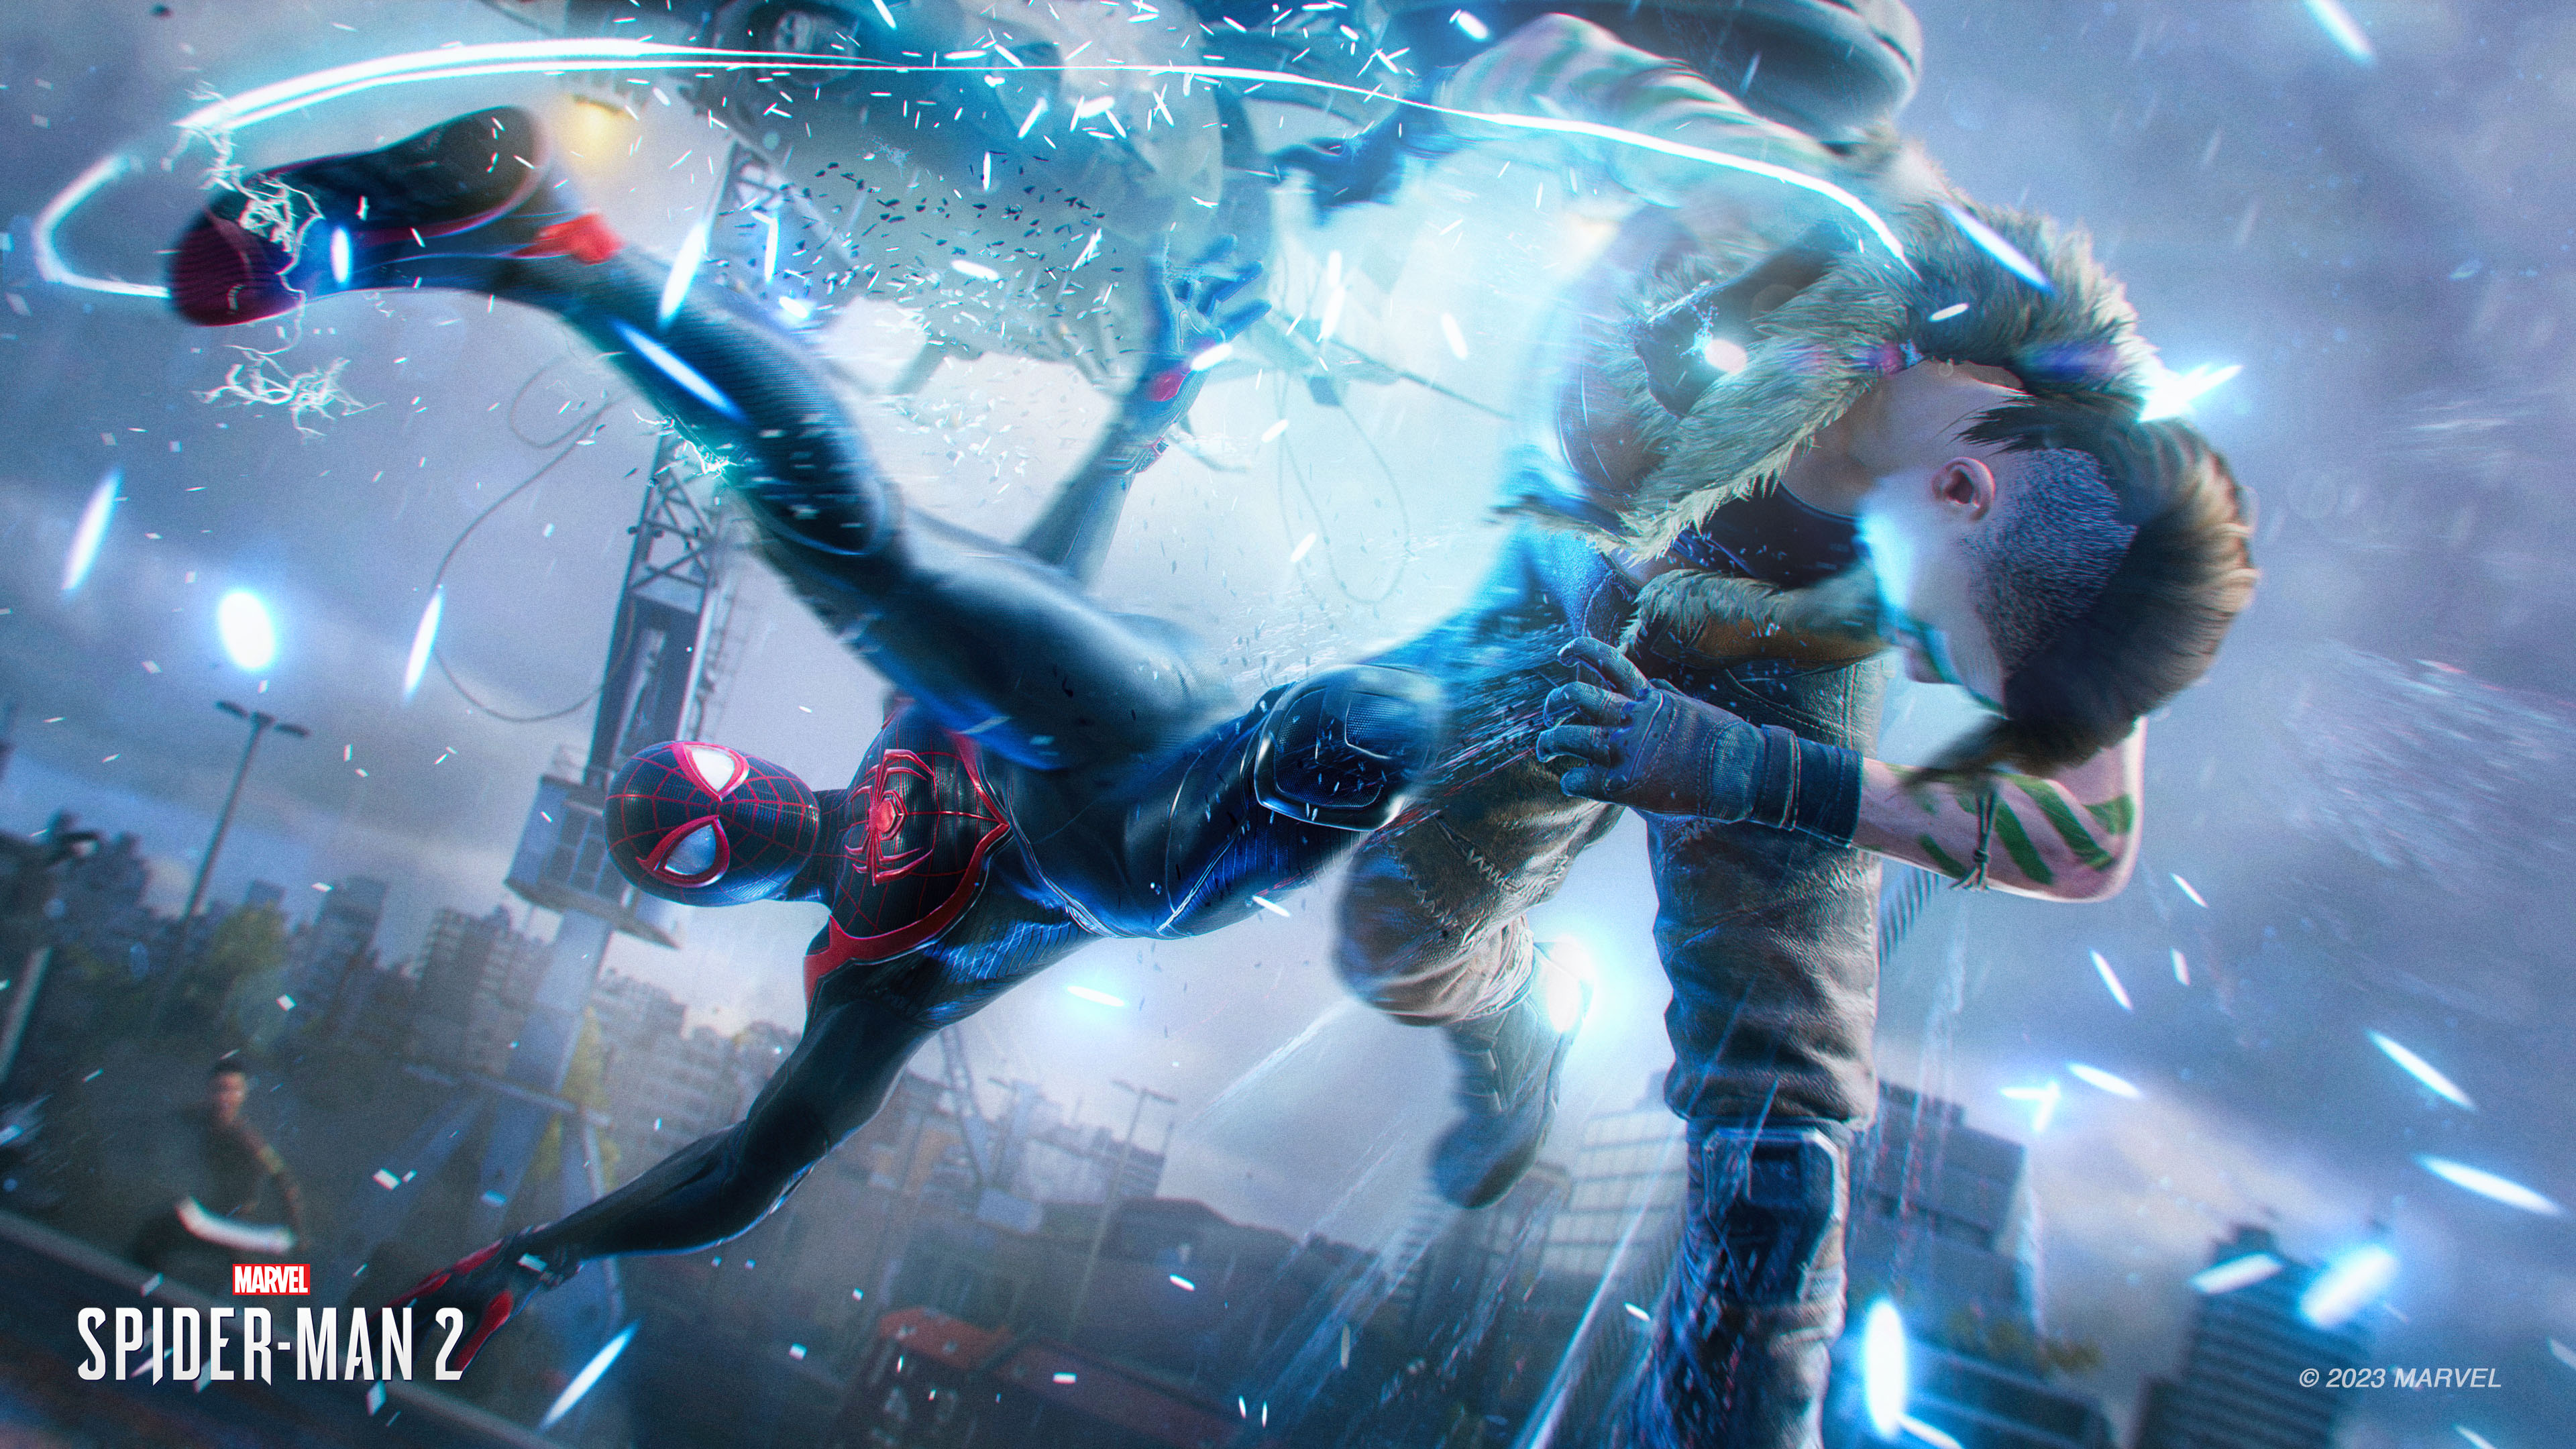 Miles Morales kicks a goon in the head in Marvel's Spider-Man 2.